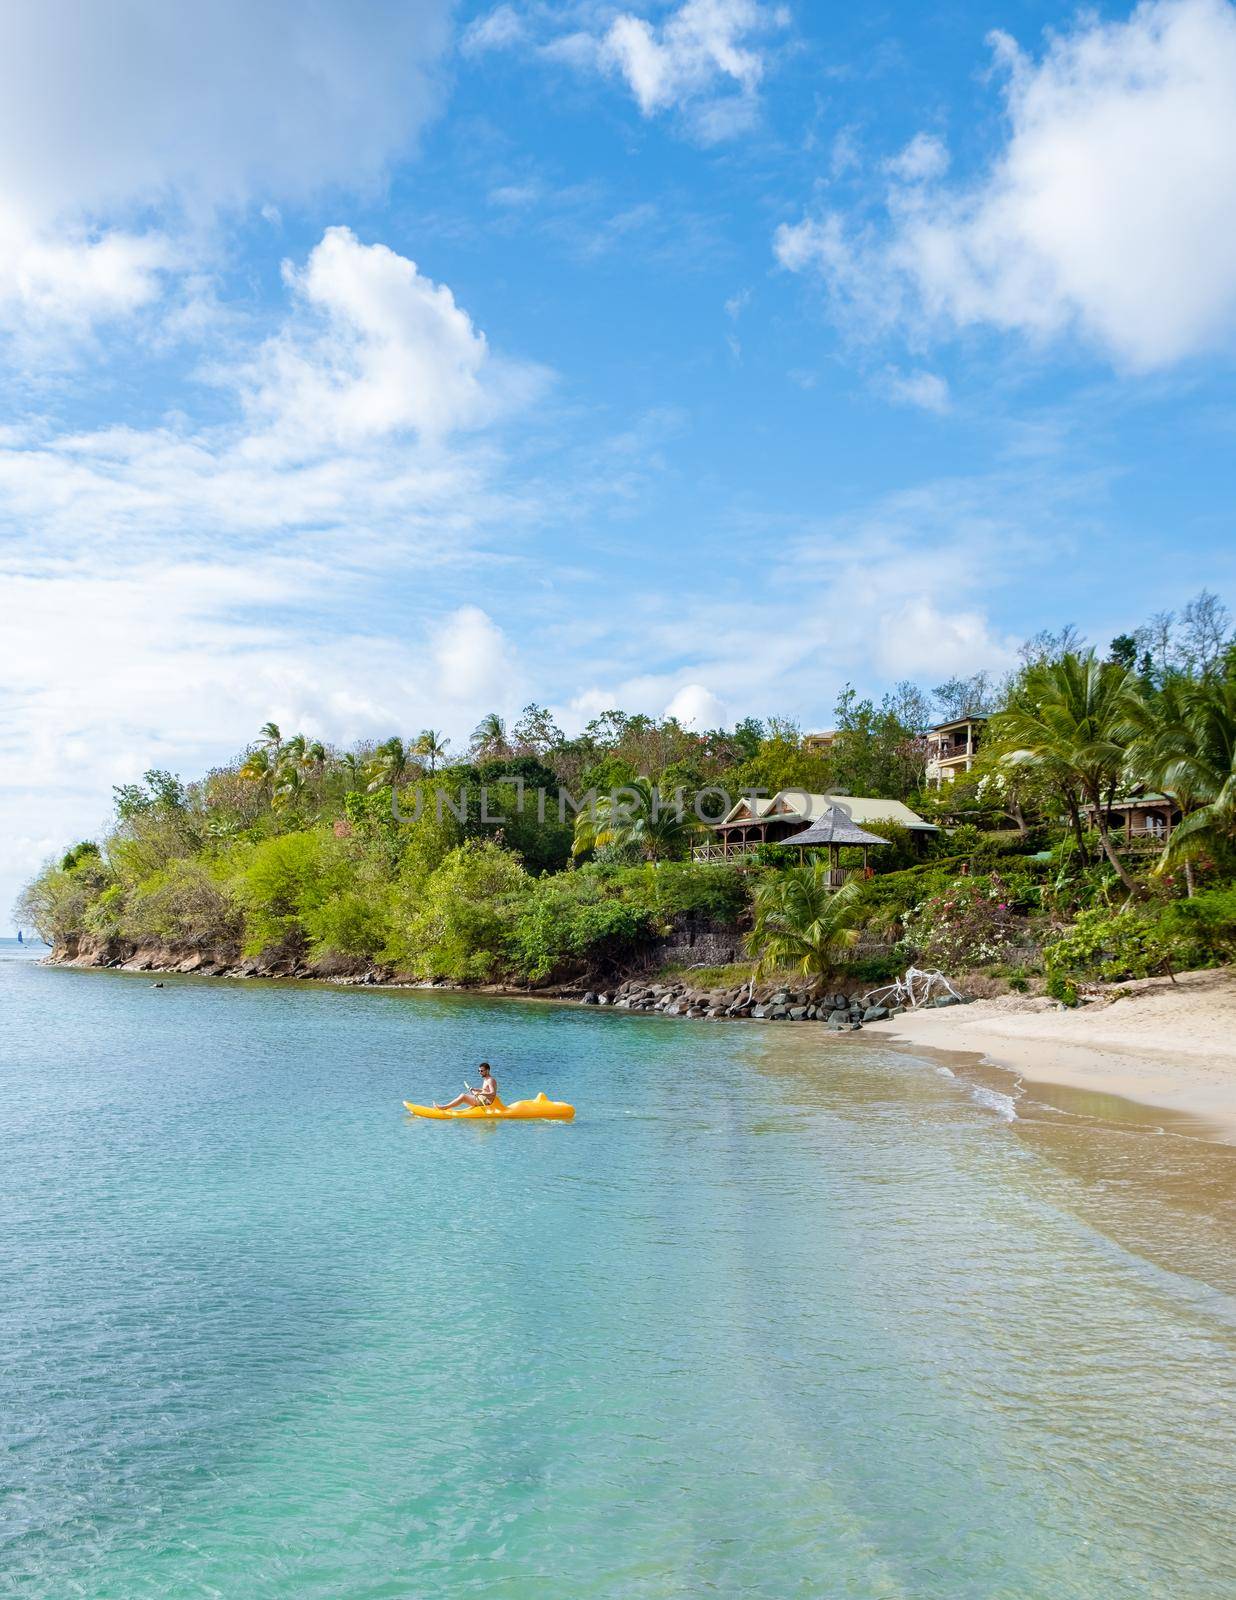 young men in a kayak at a tropical island in the Caribbean sea, St Lucia or Saint Lucia. young man on vacation on a tropical island